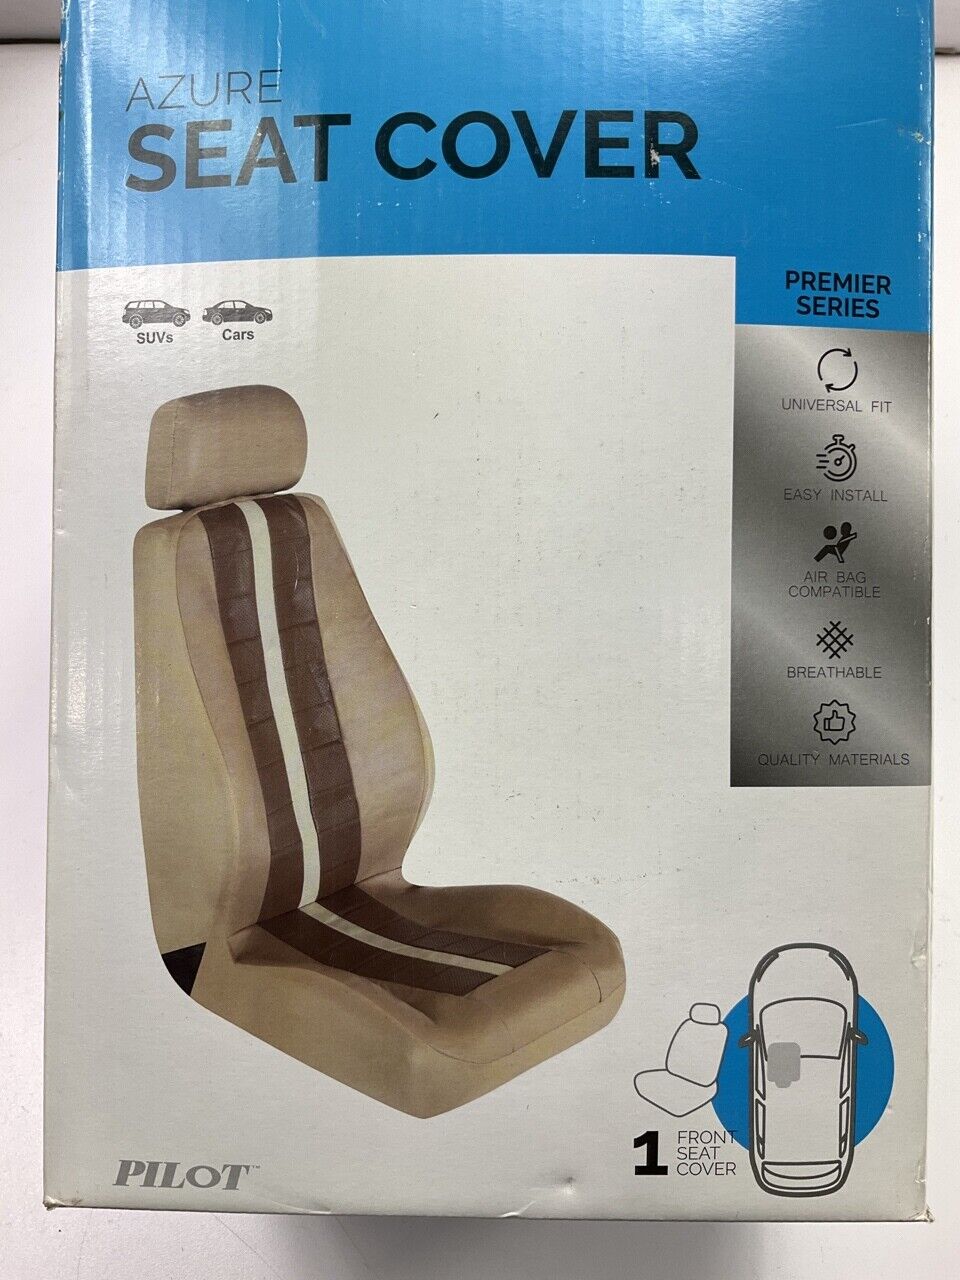 PILOT SC-670 Azure Tan Seat Cover, Does One Seat, For Low Back Car & SUV Seats